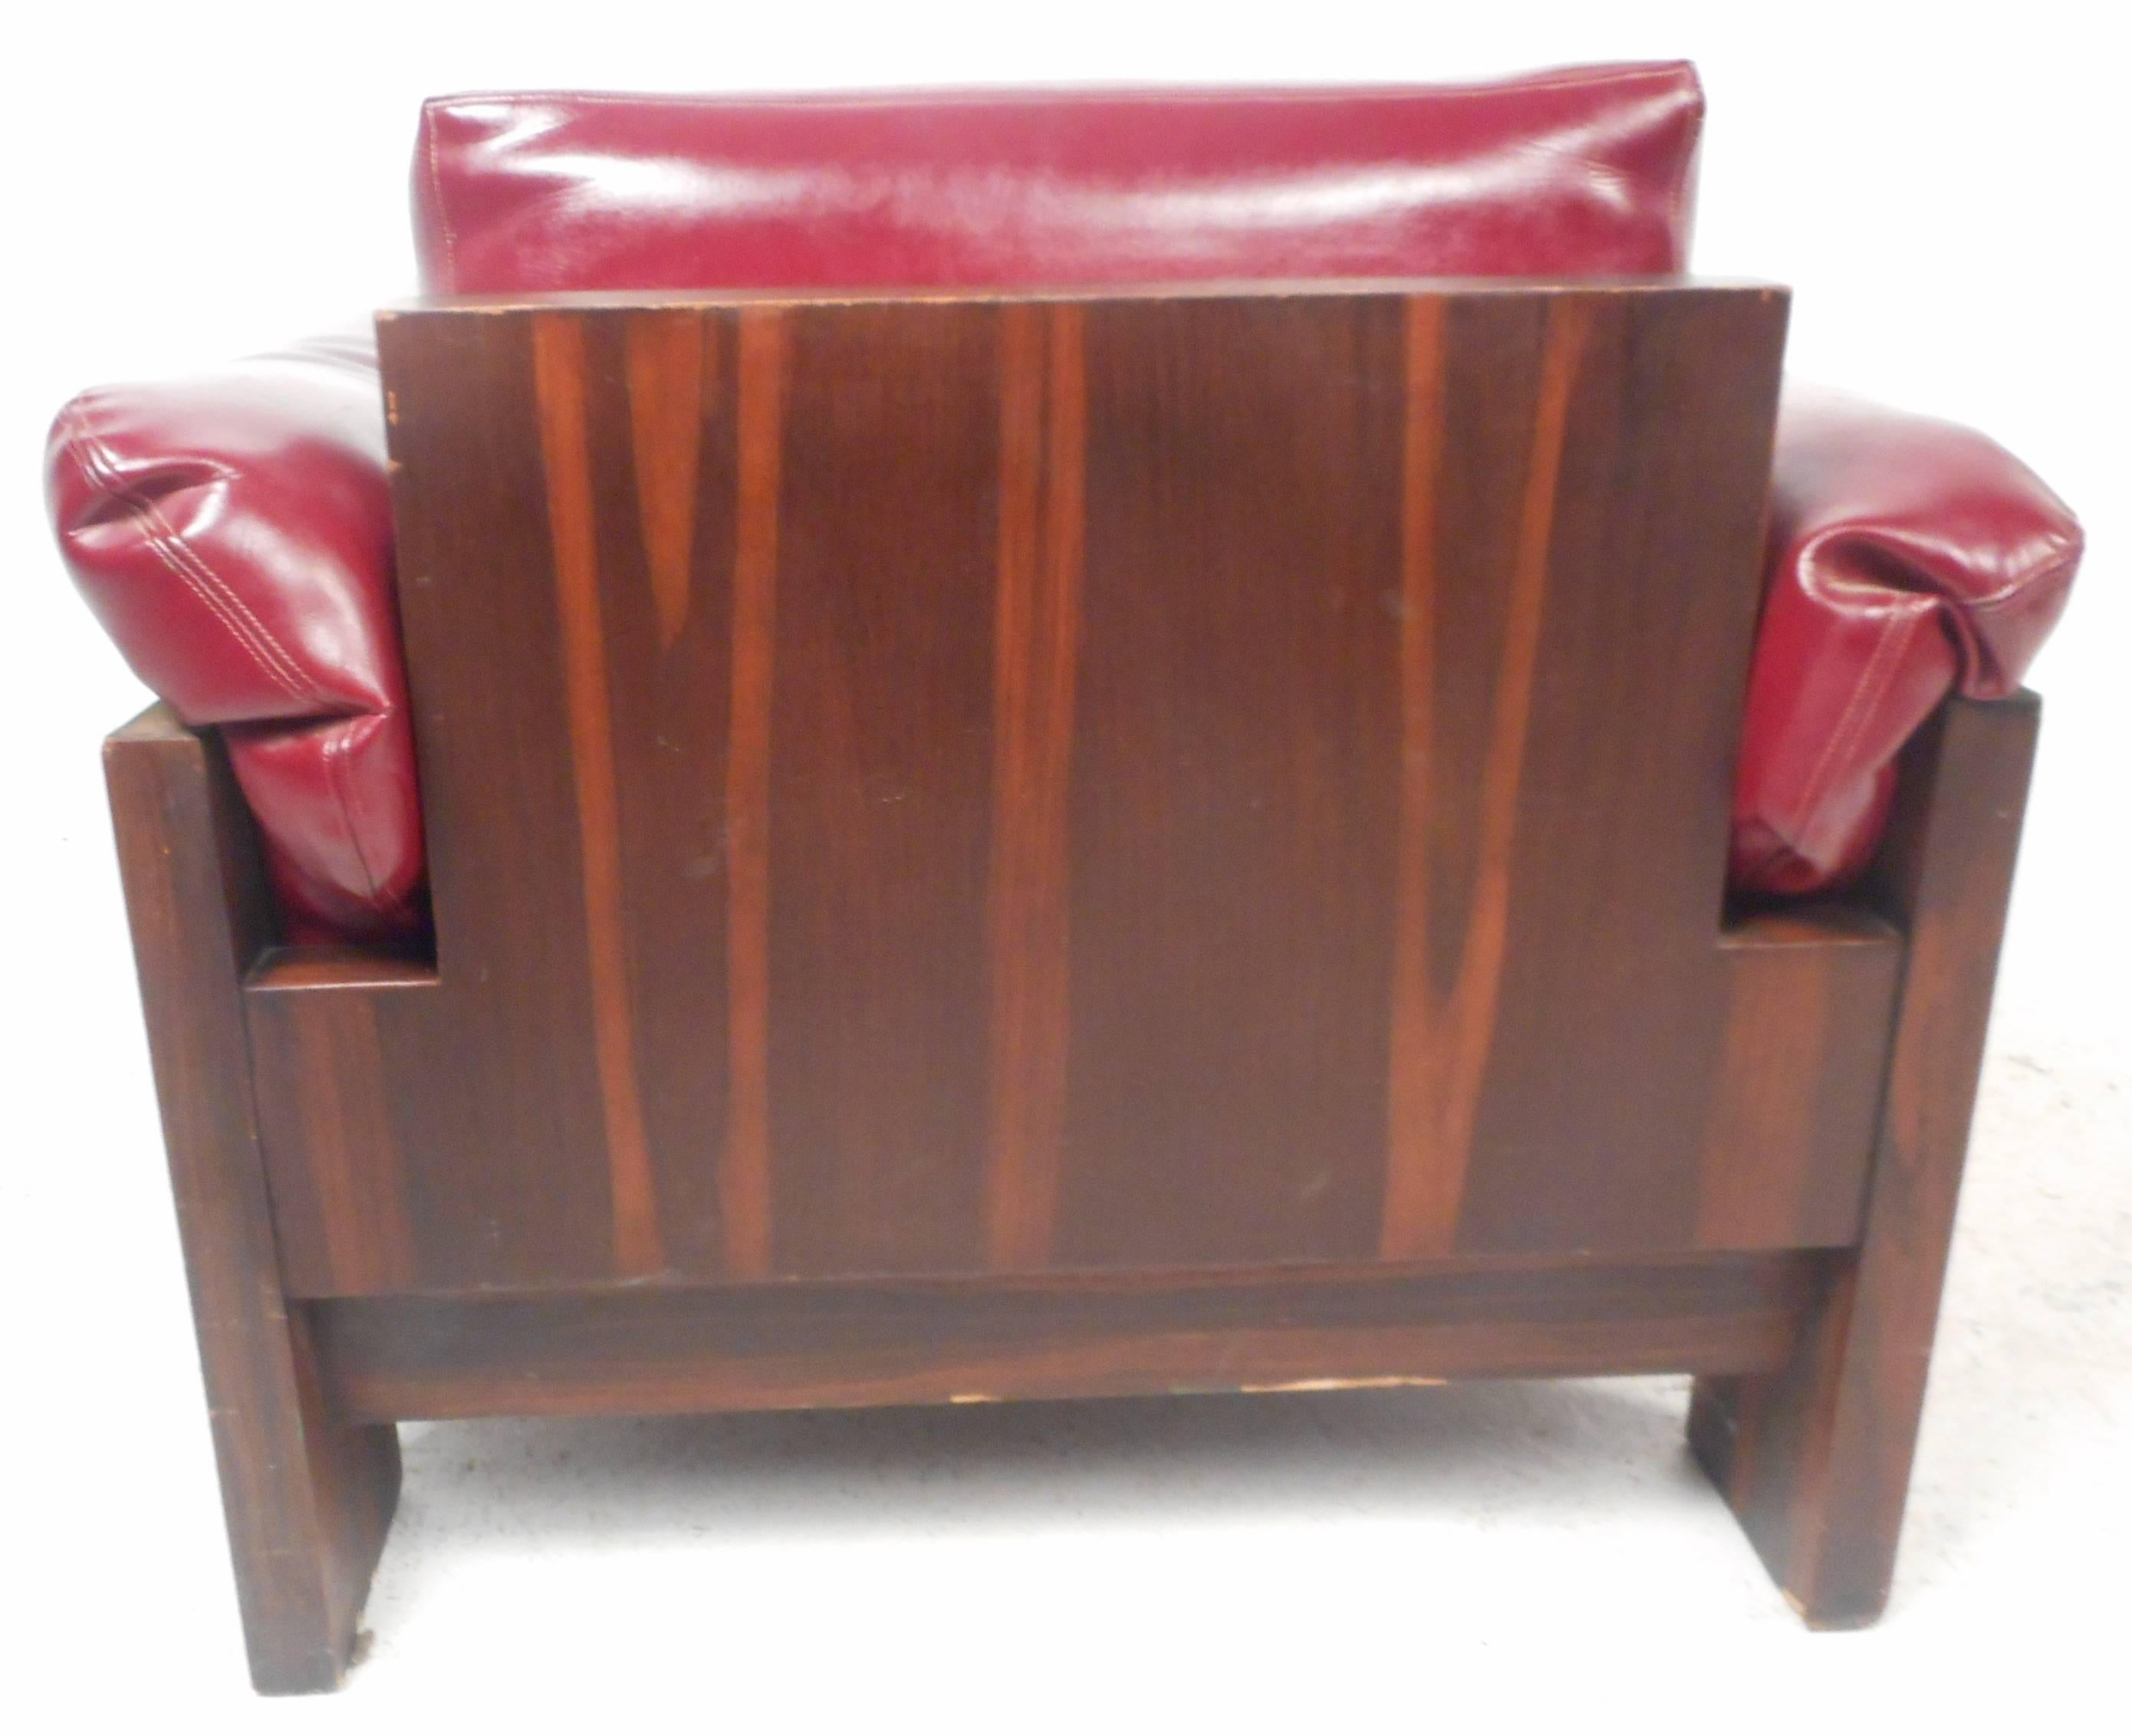 Late 20th Century Mid-Century Modern Rosewood Lounge Chair by Milo Baughman for Thayer Coggin